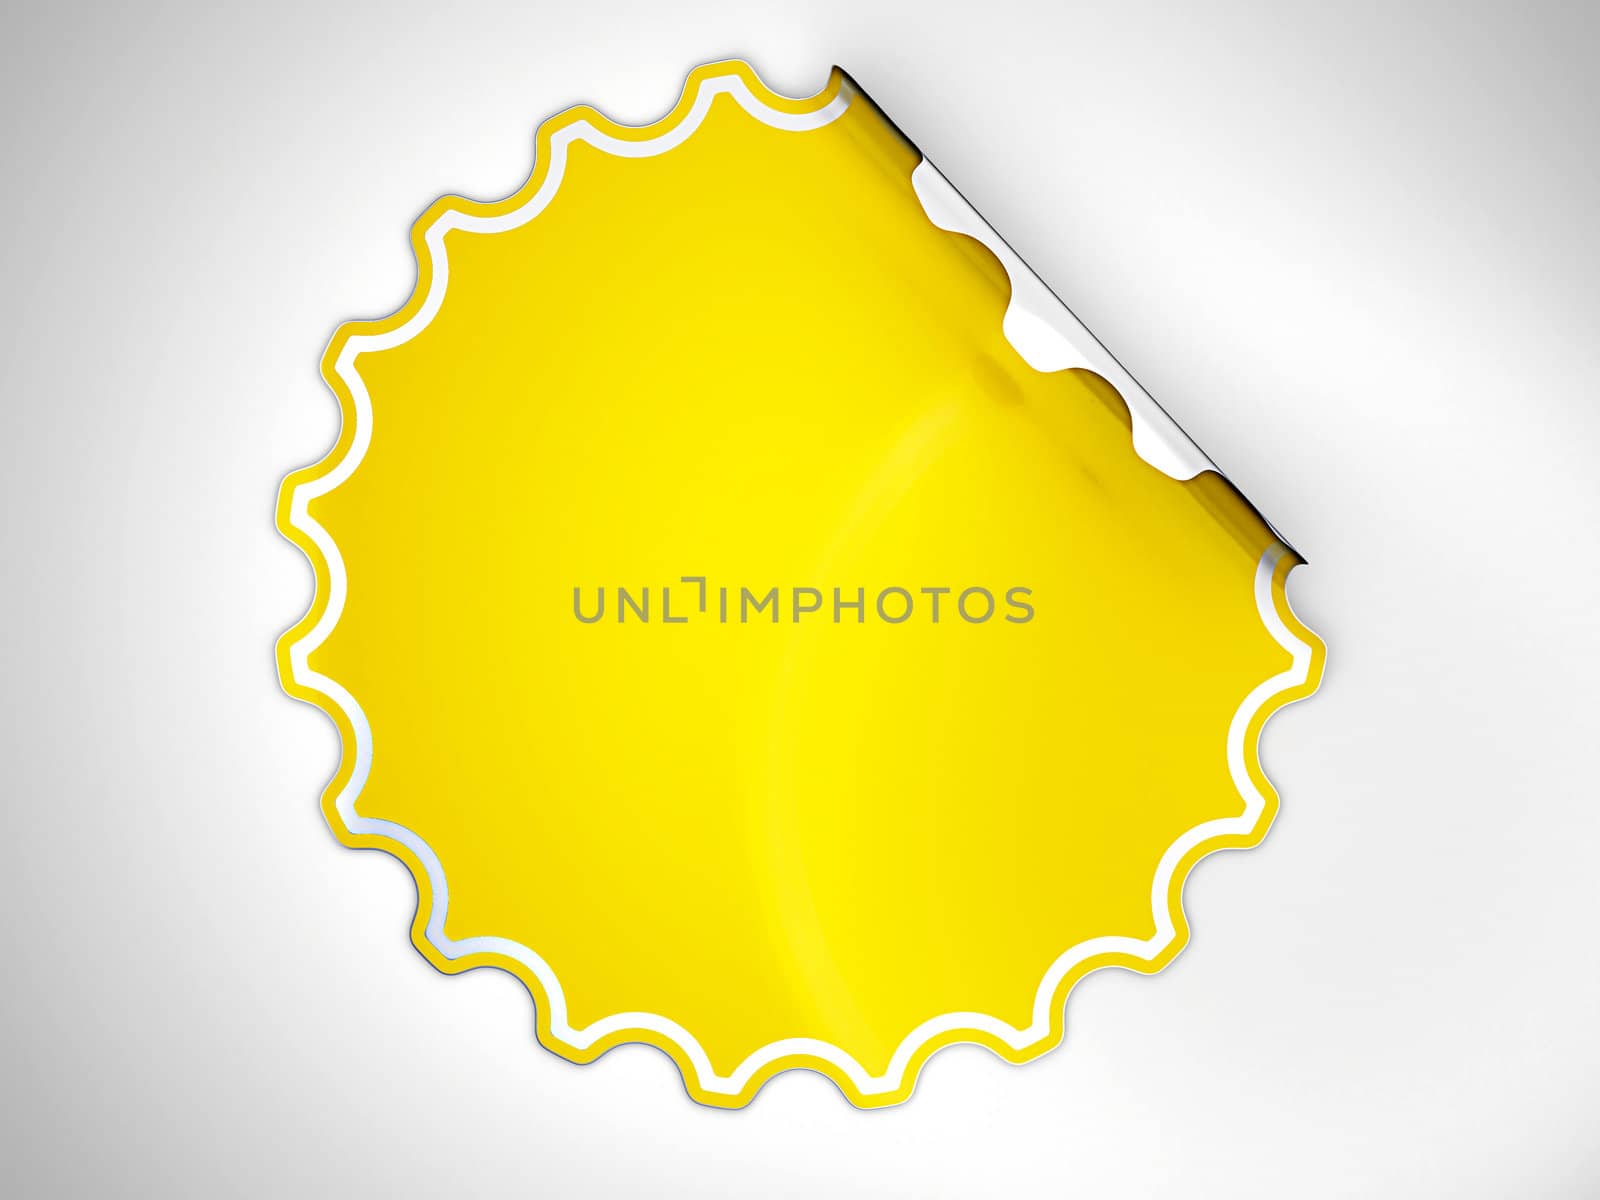 Round Yellow hamous sticker or label over grey spot light background